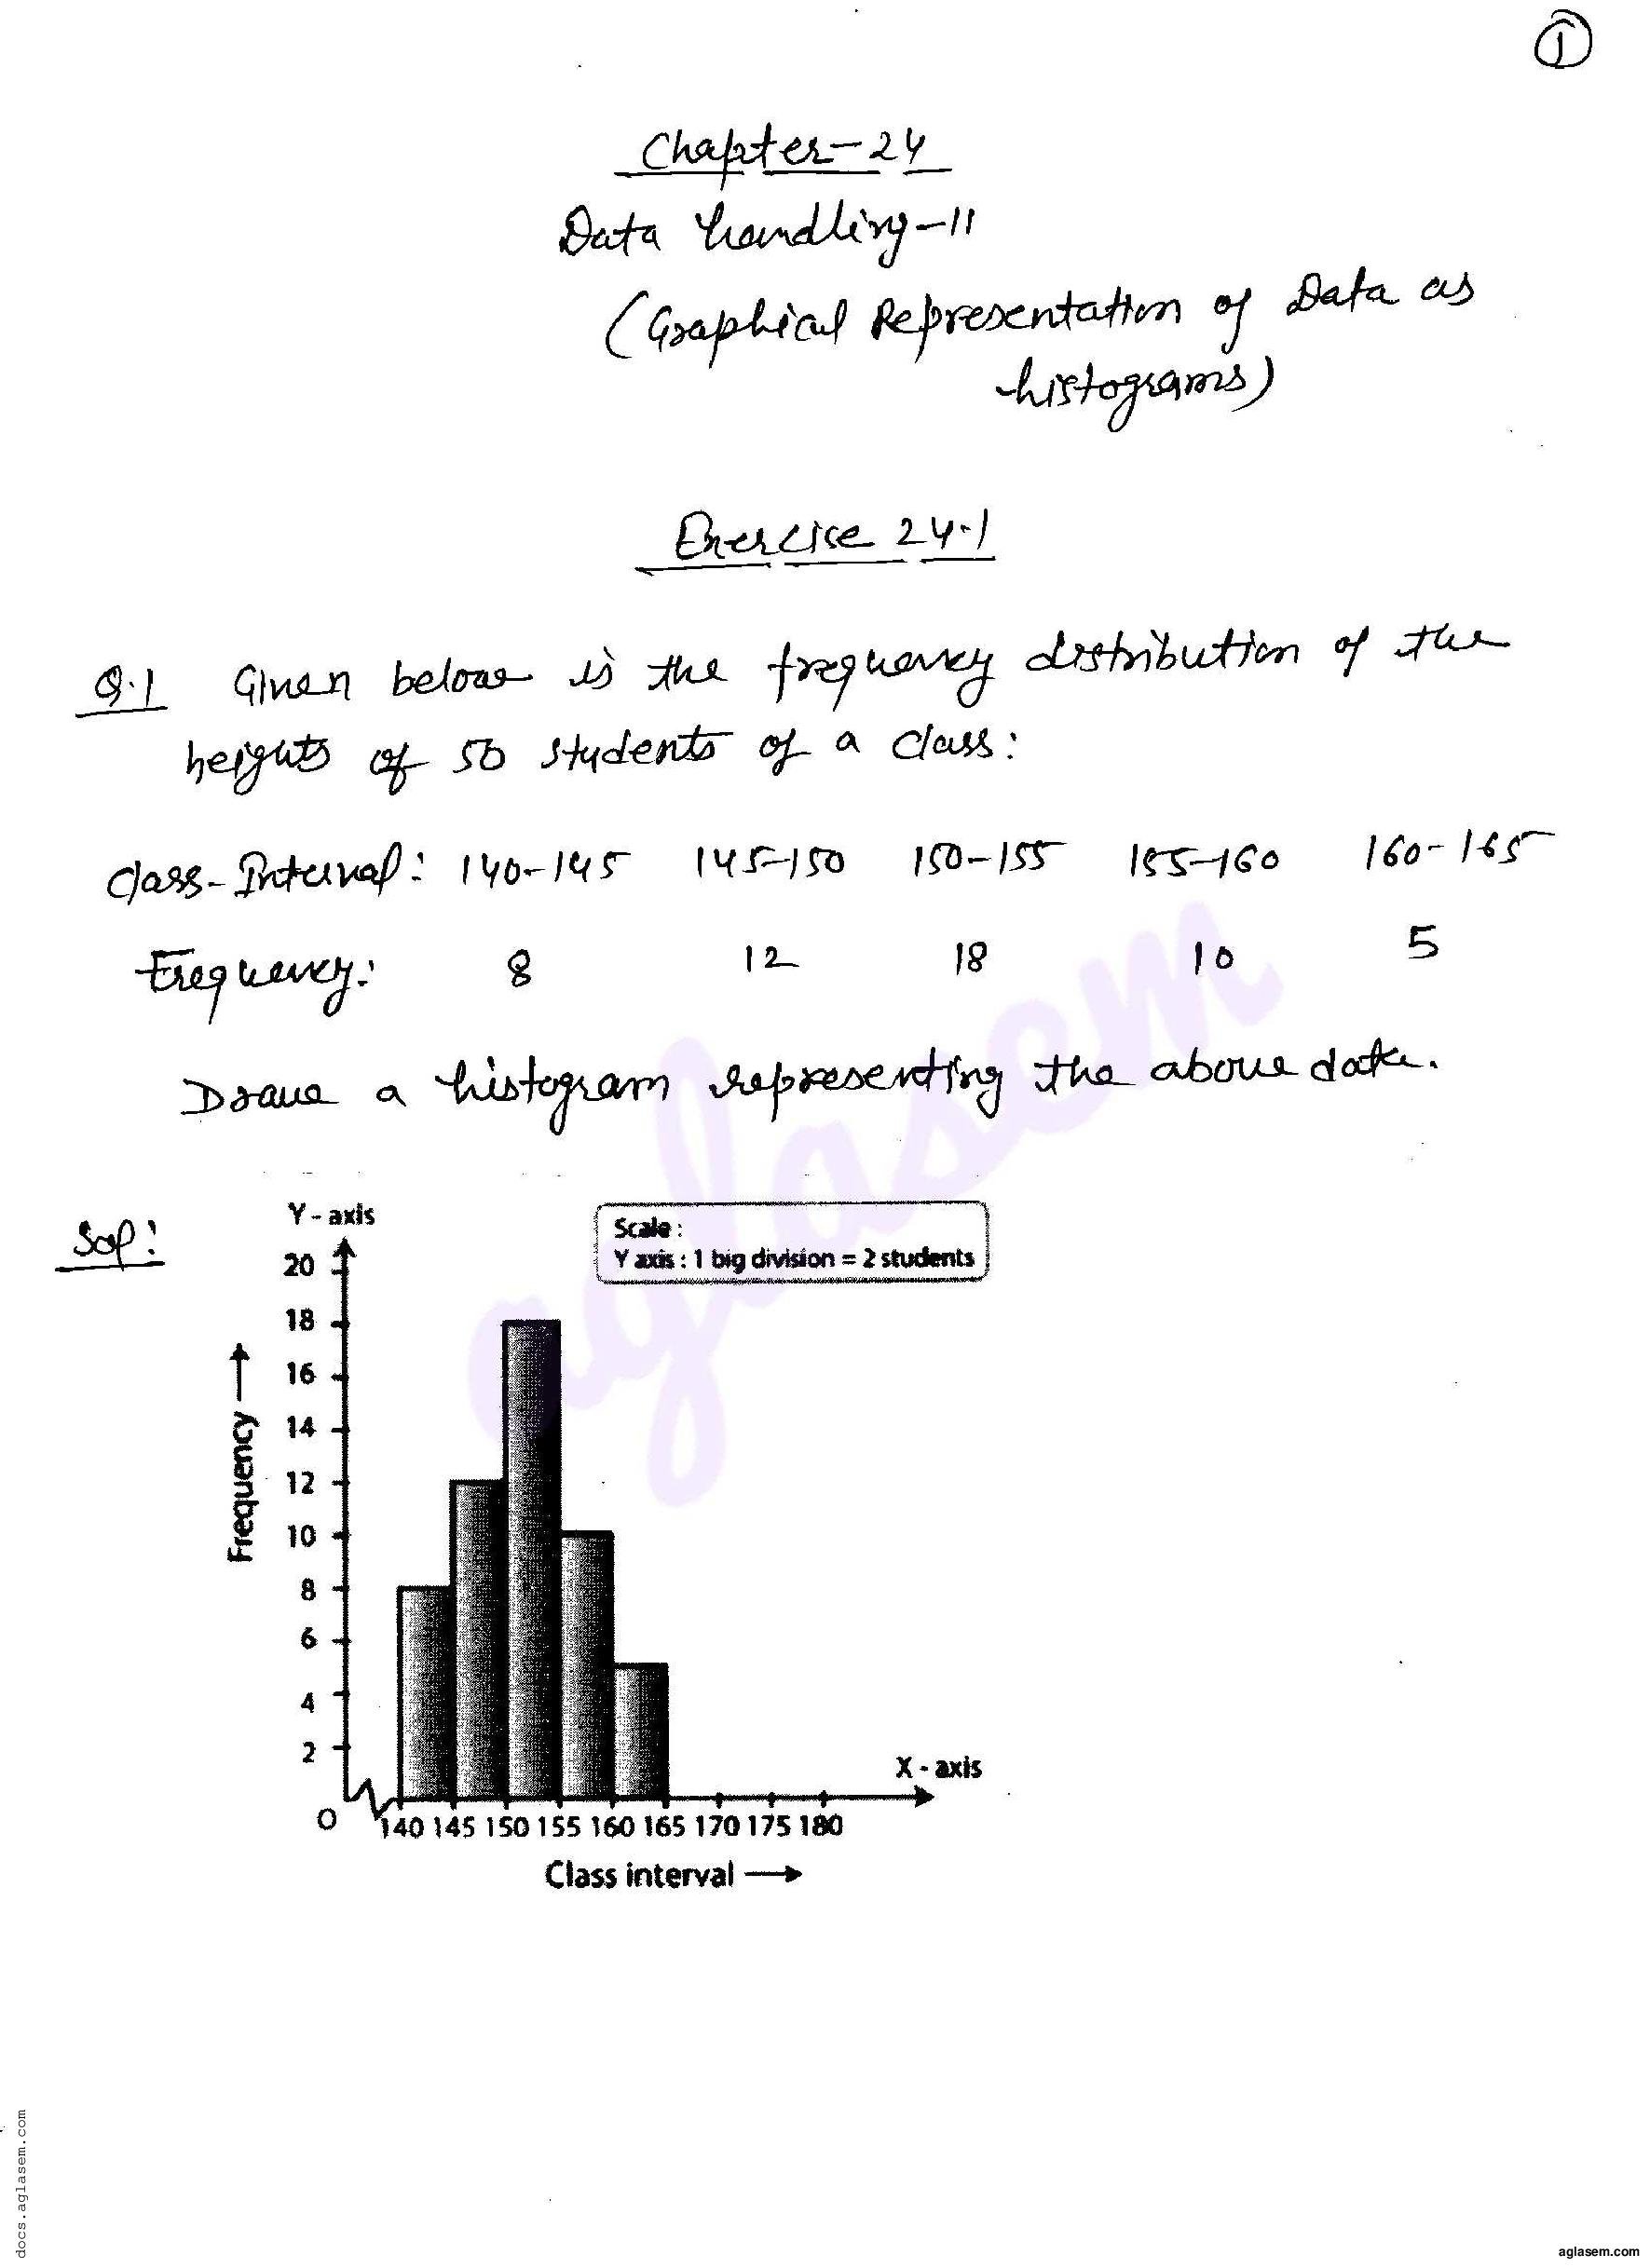 RD Sharma Solutions Class 8 Chapter 24 Data Handling II Graphical Representation of Data as Histograms Exercise 24.1 - Page 1